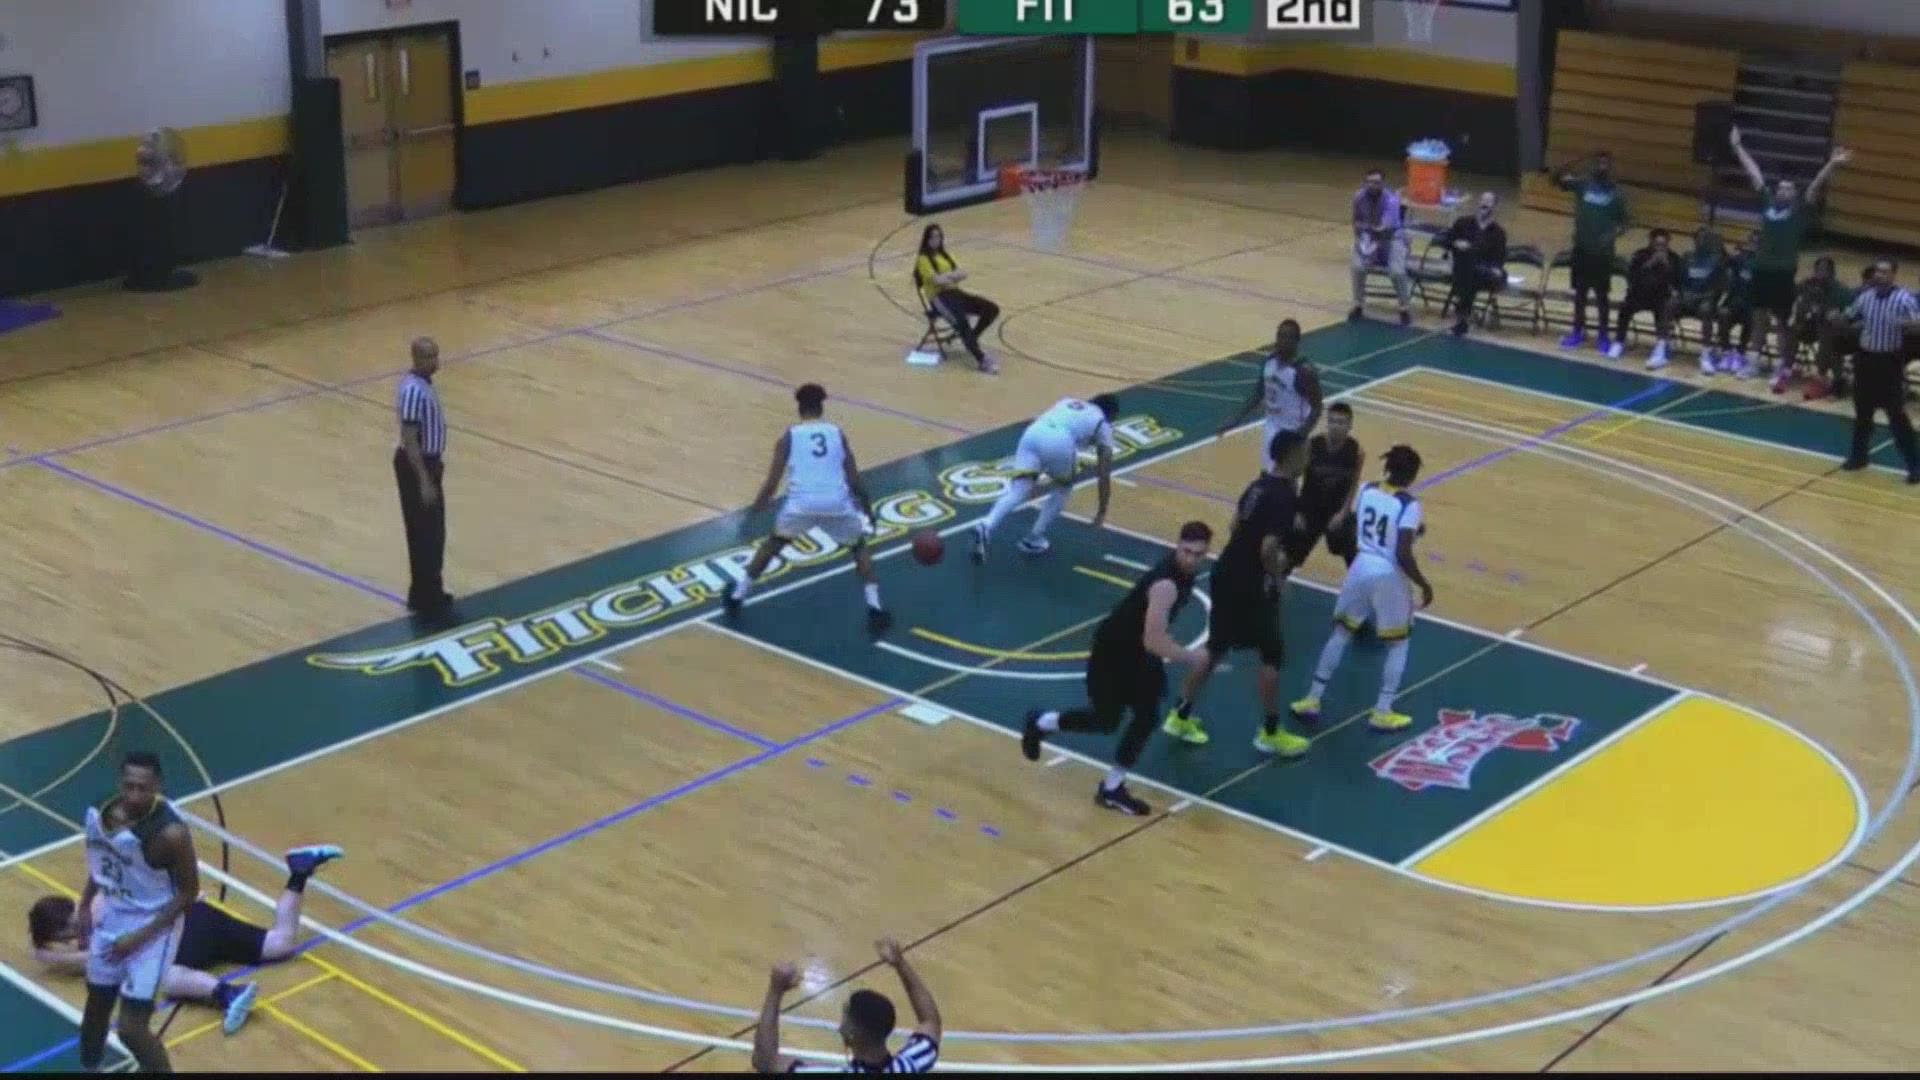 A Fitchburg State University basketball player has been suspended after he intentionally knocked out an opponent with an elbow to the face Tuesday night.